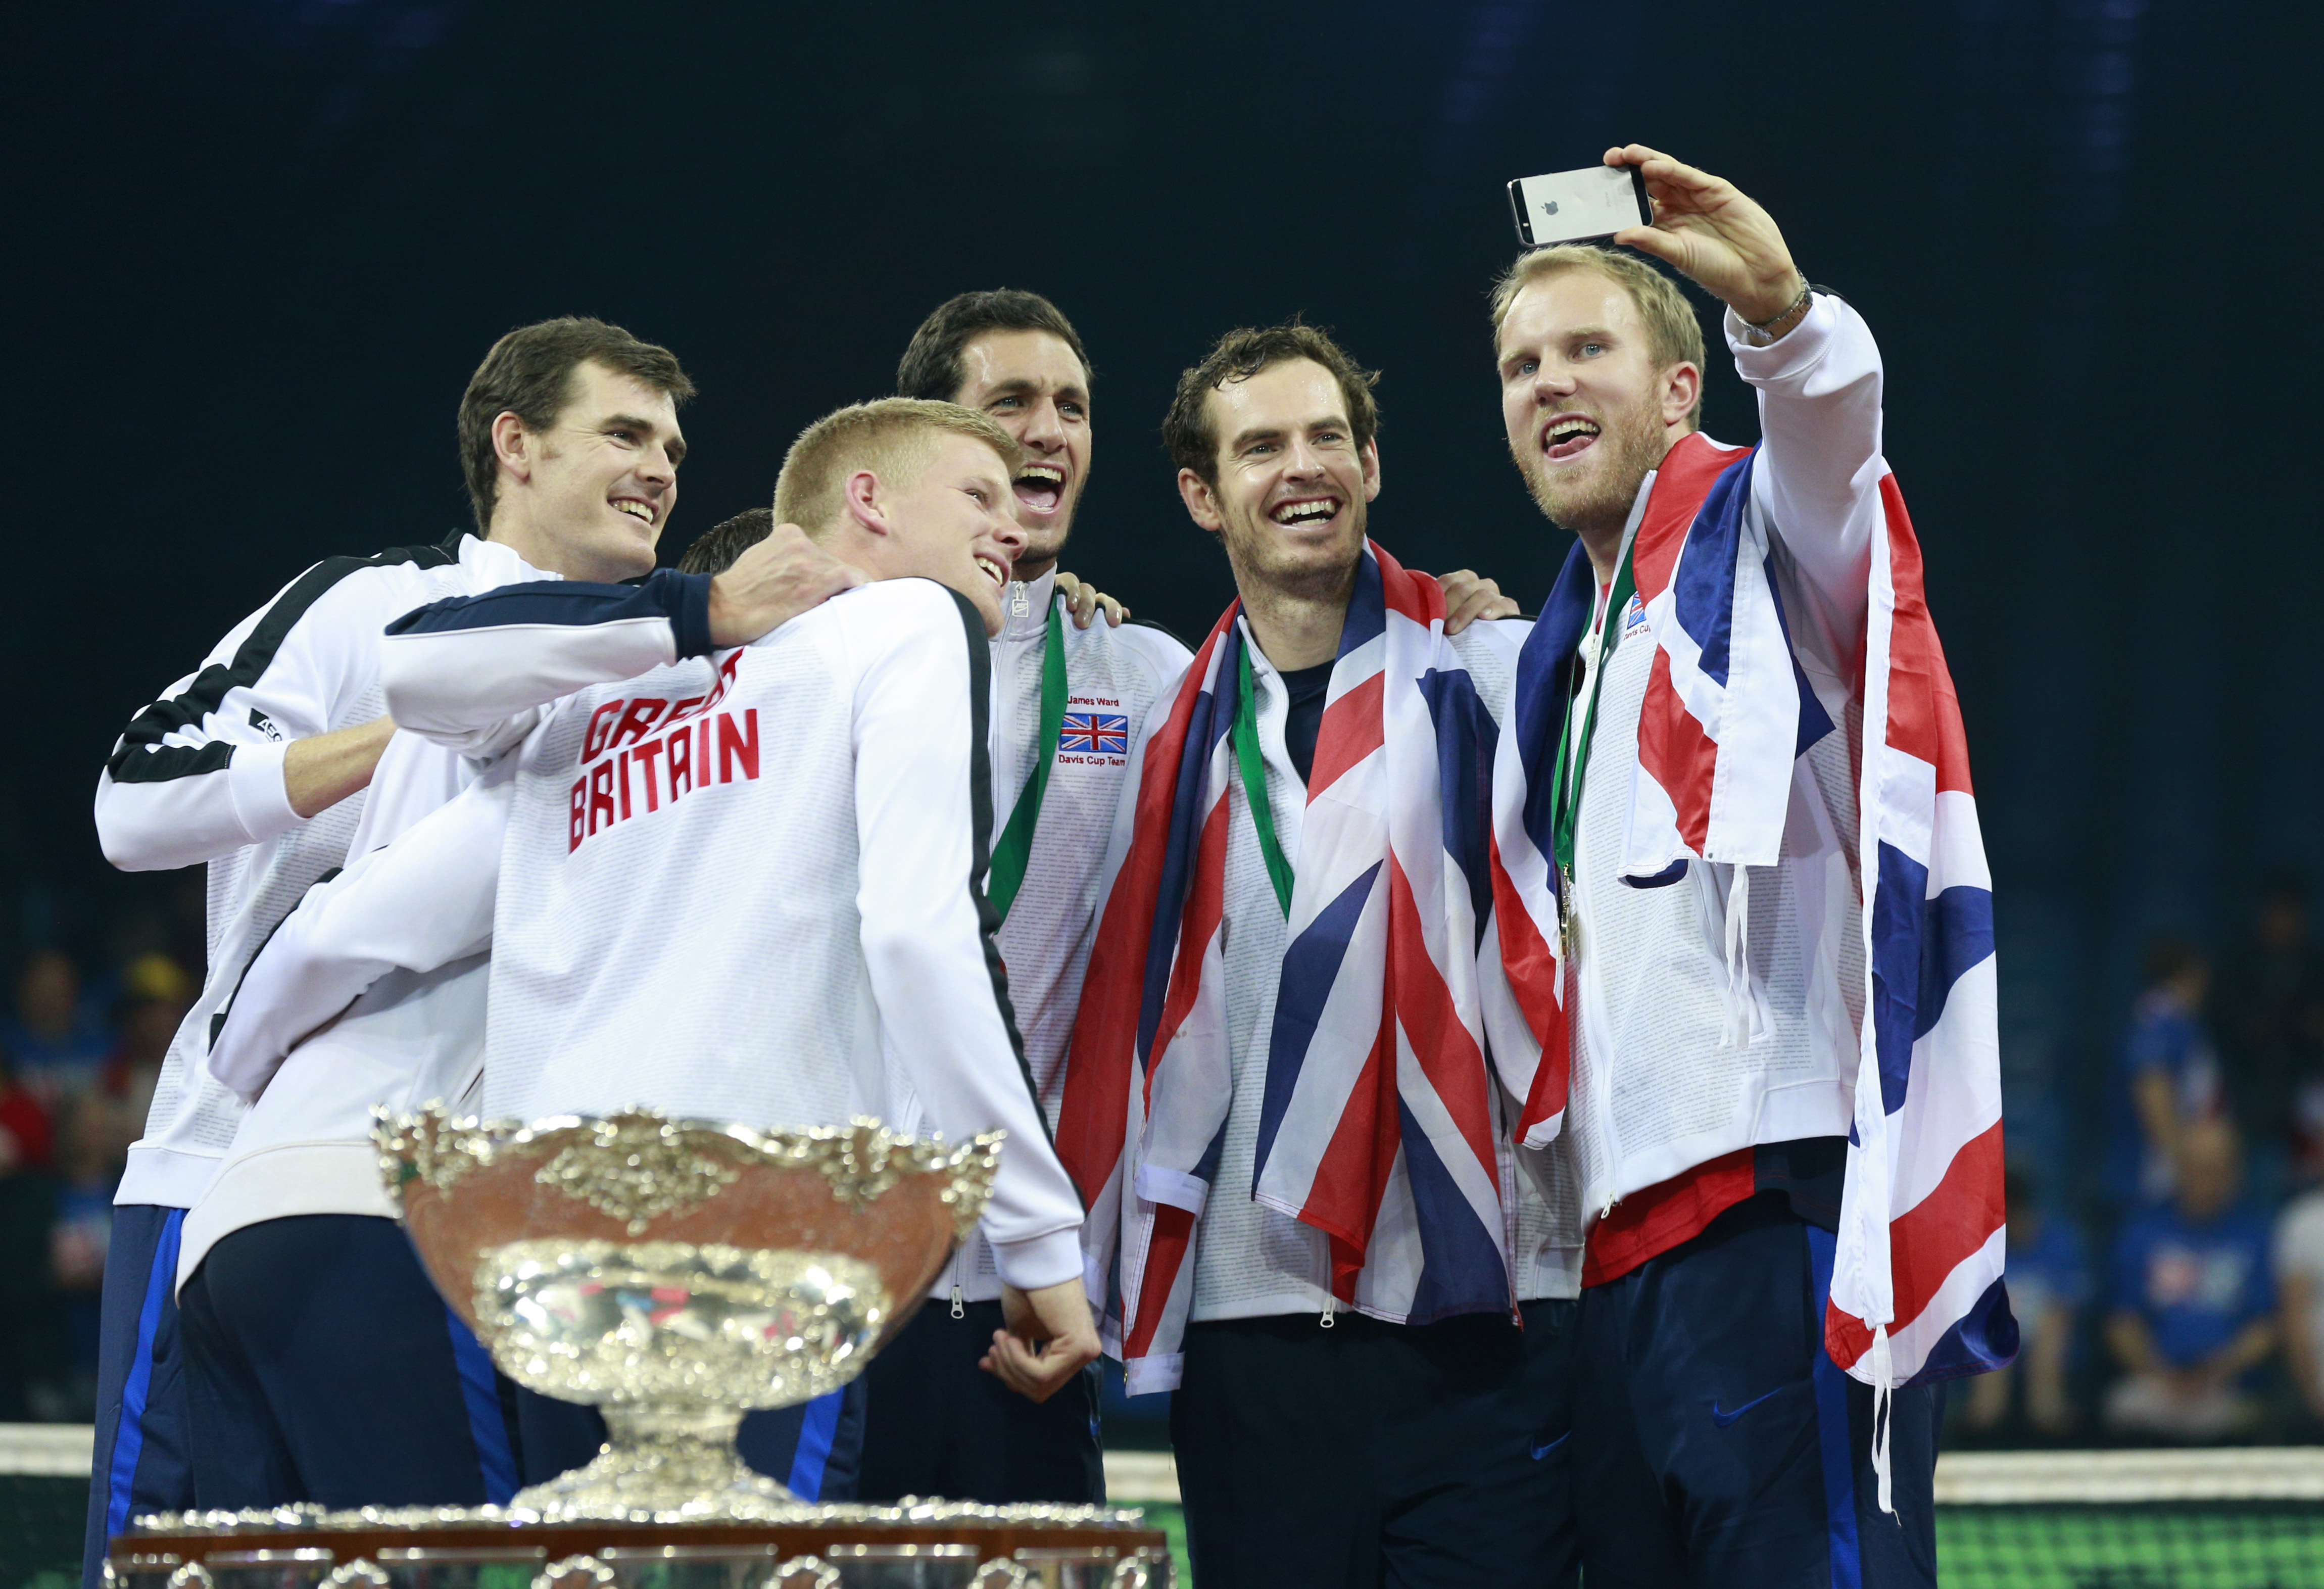 Tennis - Belgium v Great Britain - Davis Cup Final - Flanders Expo, Ghent, Belgium - 29/11/15 Men's Singles - Great Britain's Daniel Evans, Dominic Inglot, Jamie Murray, James Ward, Kyle Edmund, Andy Murray and captain Leon Smith celebrate with the trophy as they take a selfie after winning the Davis Cup Action Images via Reuters / Jason Cairnduff Livepic